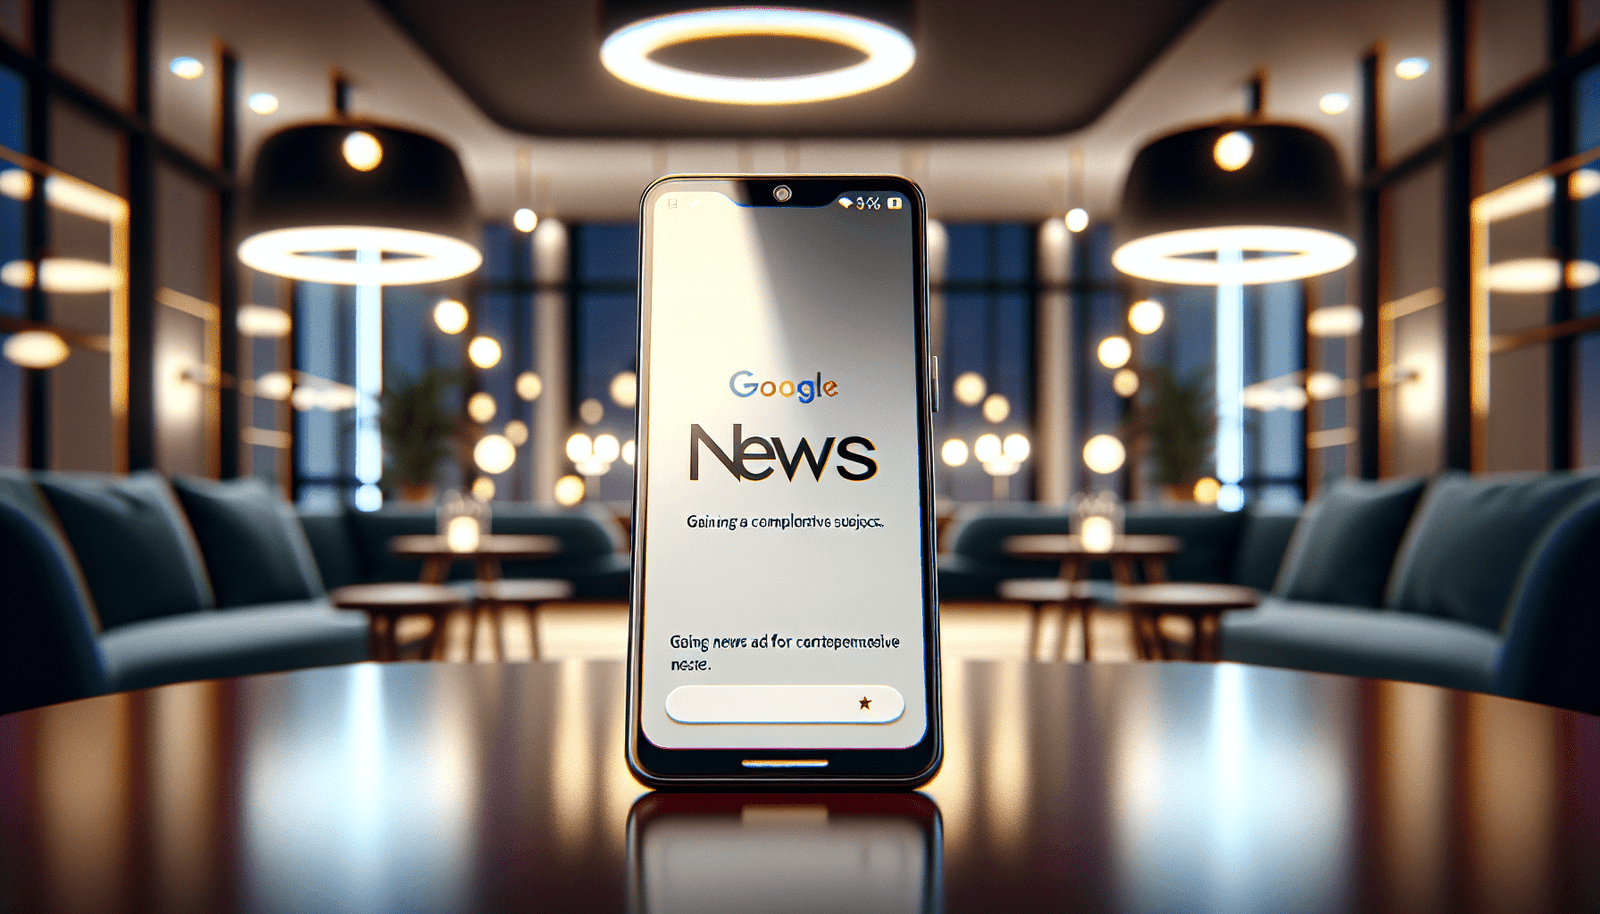 Google News: Your One-Stop Source for News